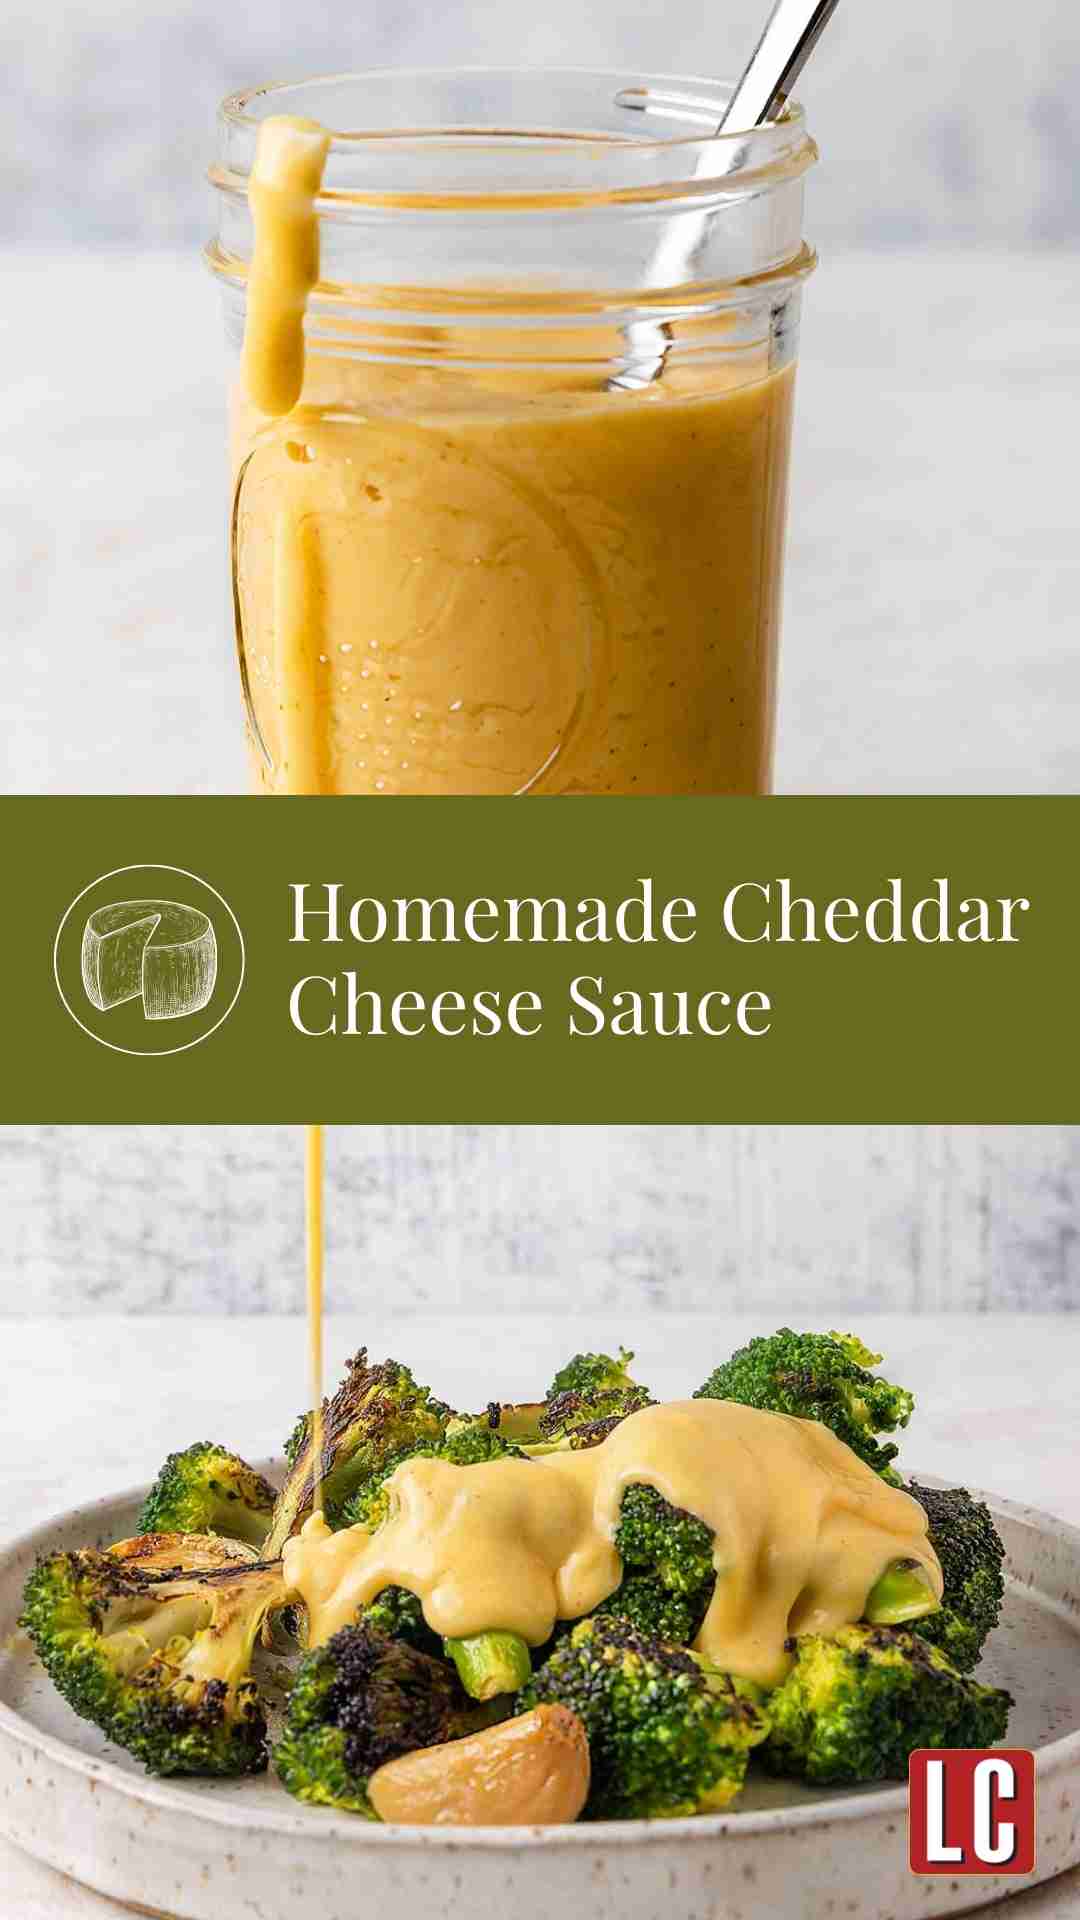 A jar of cheese sauce with a drip down the side and a plate of roasted broccoli with cheese sauce being poured over it.